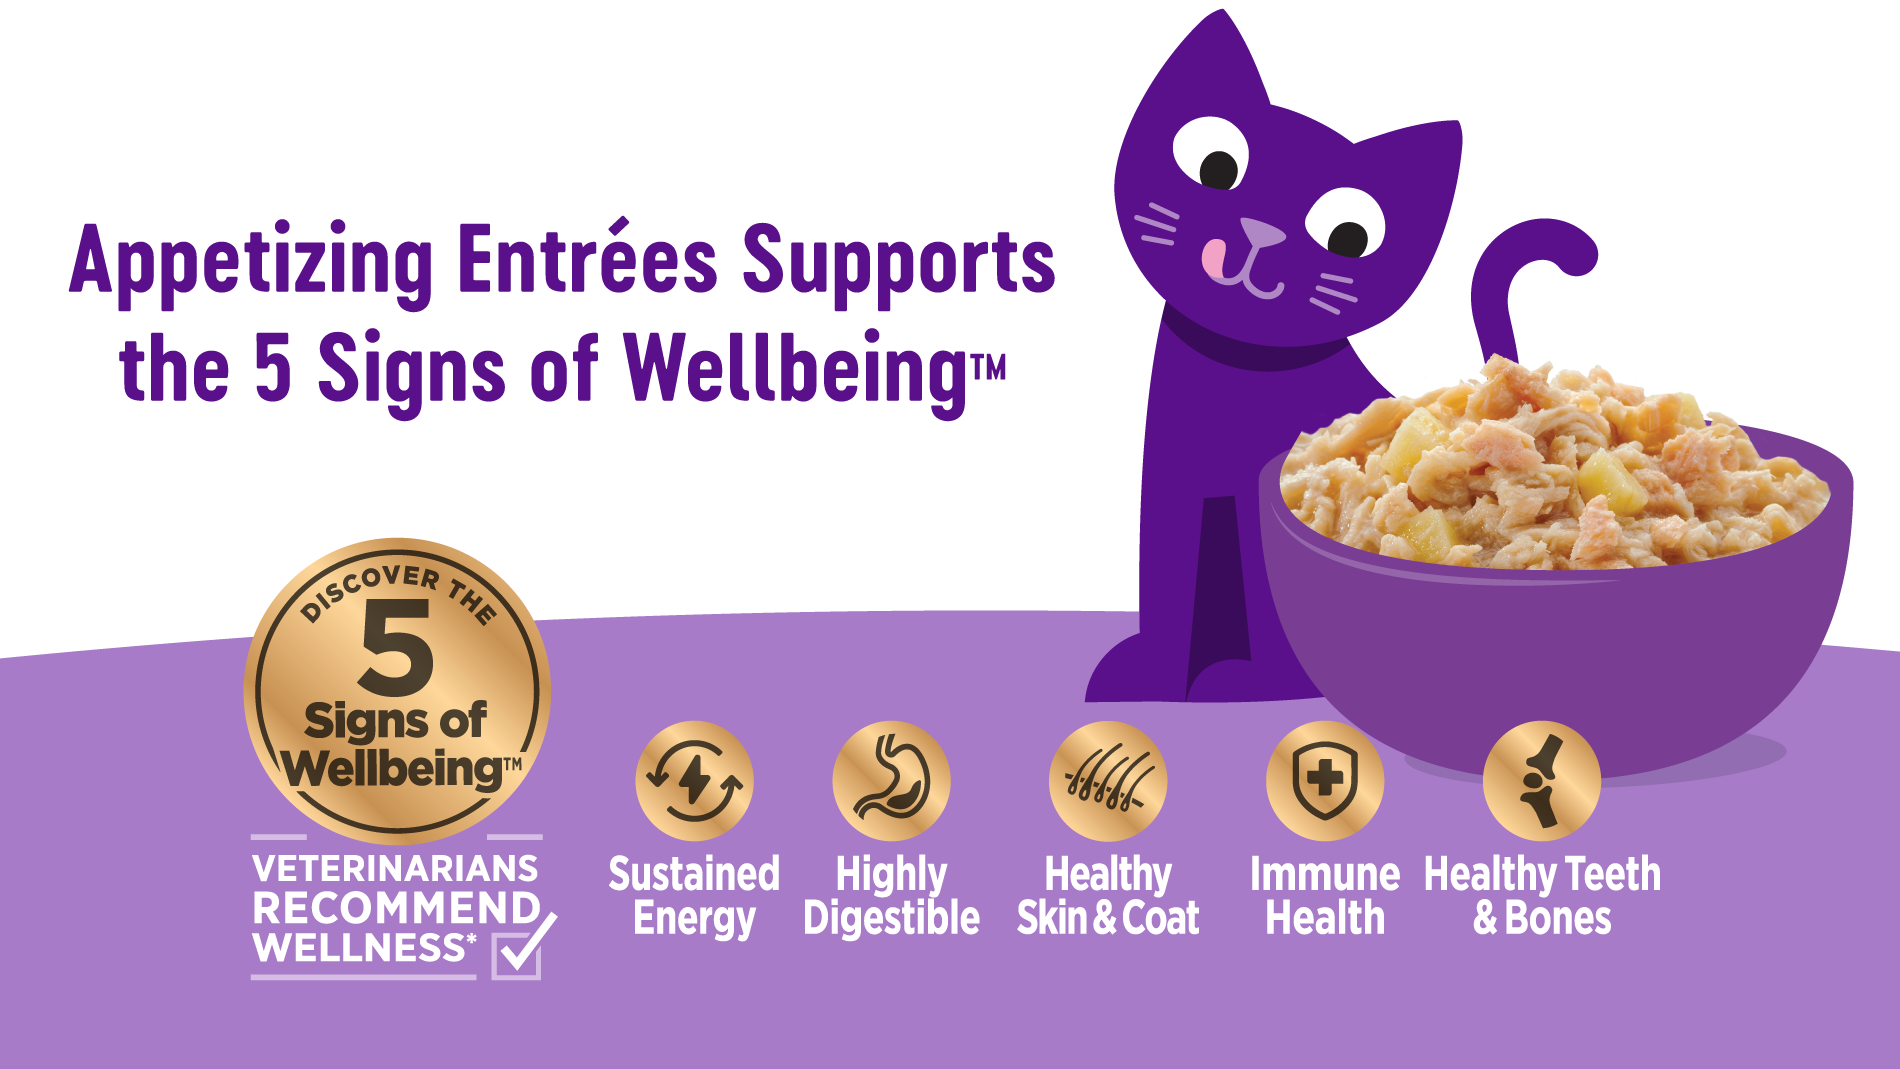 Appetizing Entrées Supports the 5 Signs of Wellbeing(TM)

Discover the 5 signs of wellbeing, veterinarians recommend wellness: sustained energy, highly digestible, healthy skin and coat, immune health, healthy teeth and bones. 